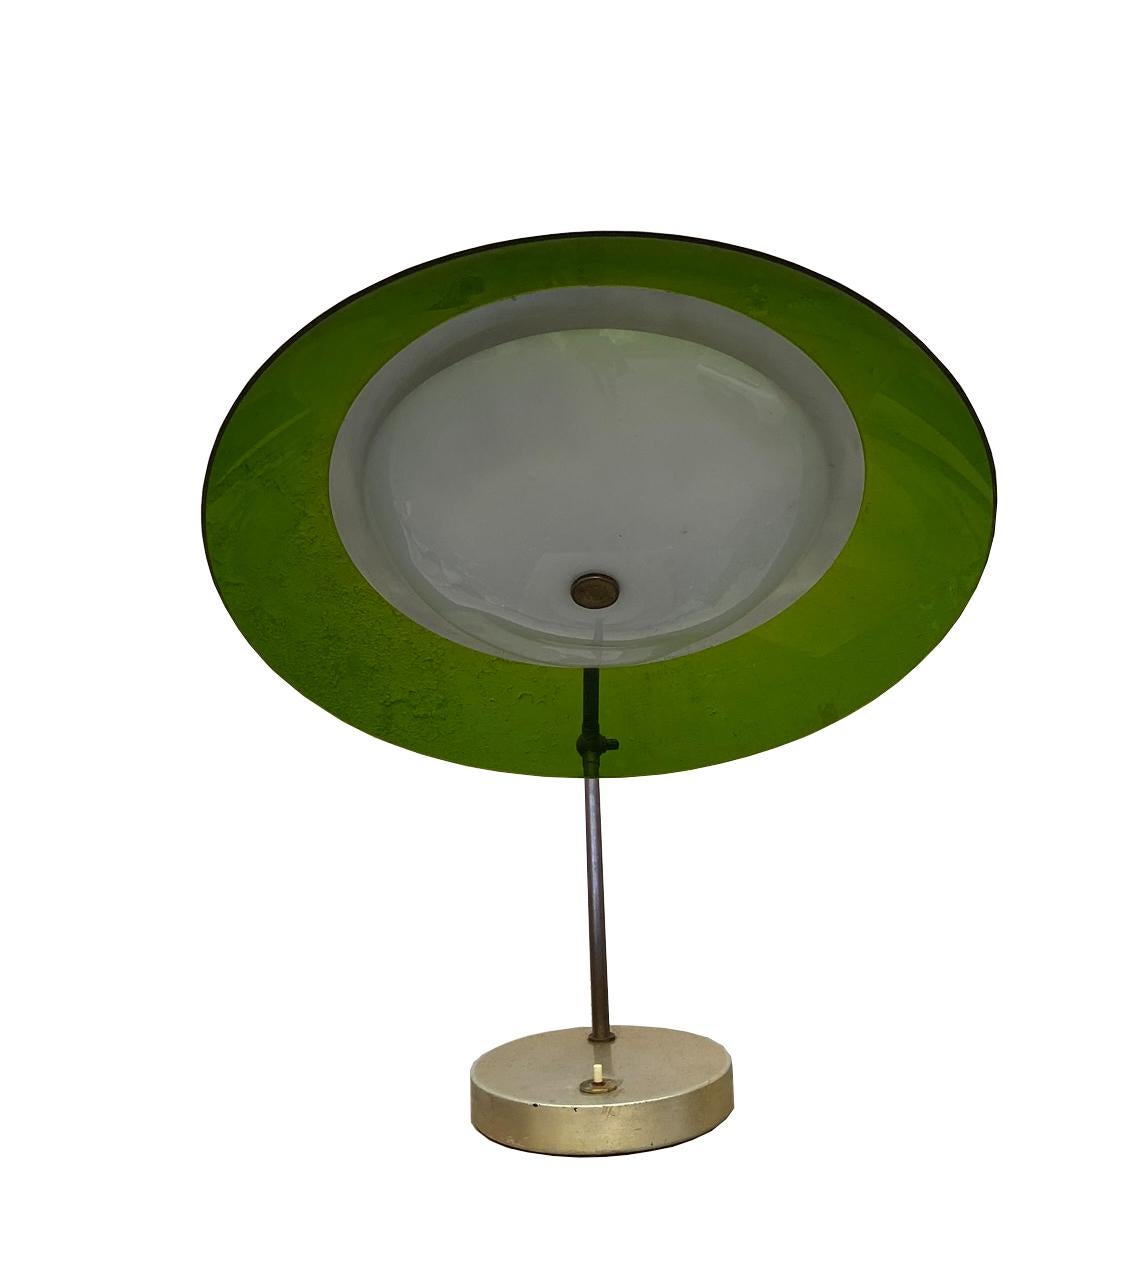 1950s Italian table lamp from Stilux Milano with brass base with switch and green plexi dome reflector which can be playfully positioned from the articulating arm which has two adjustable joints. 
The diffuser is slightly deformed